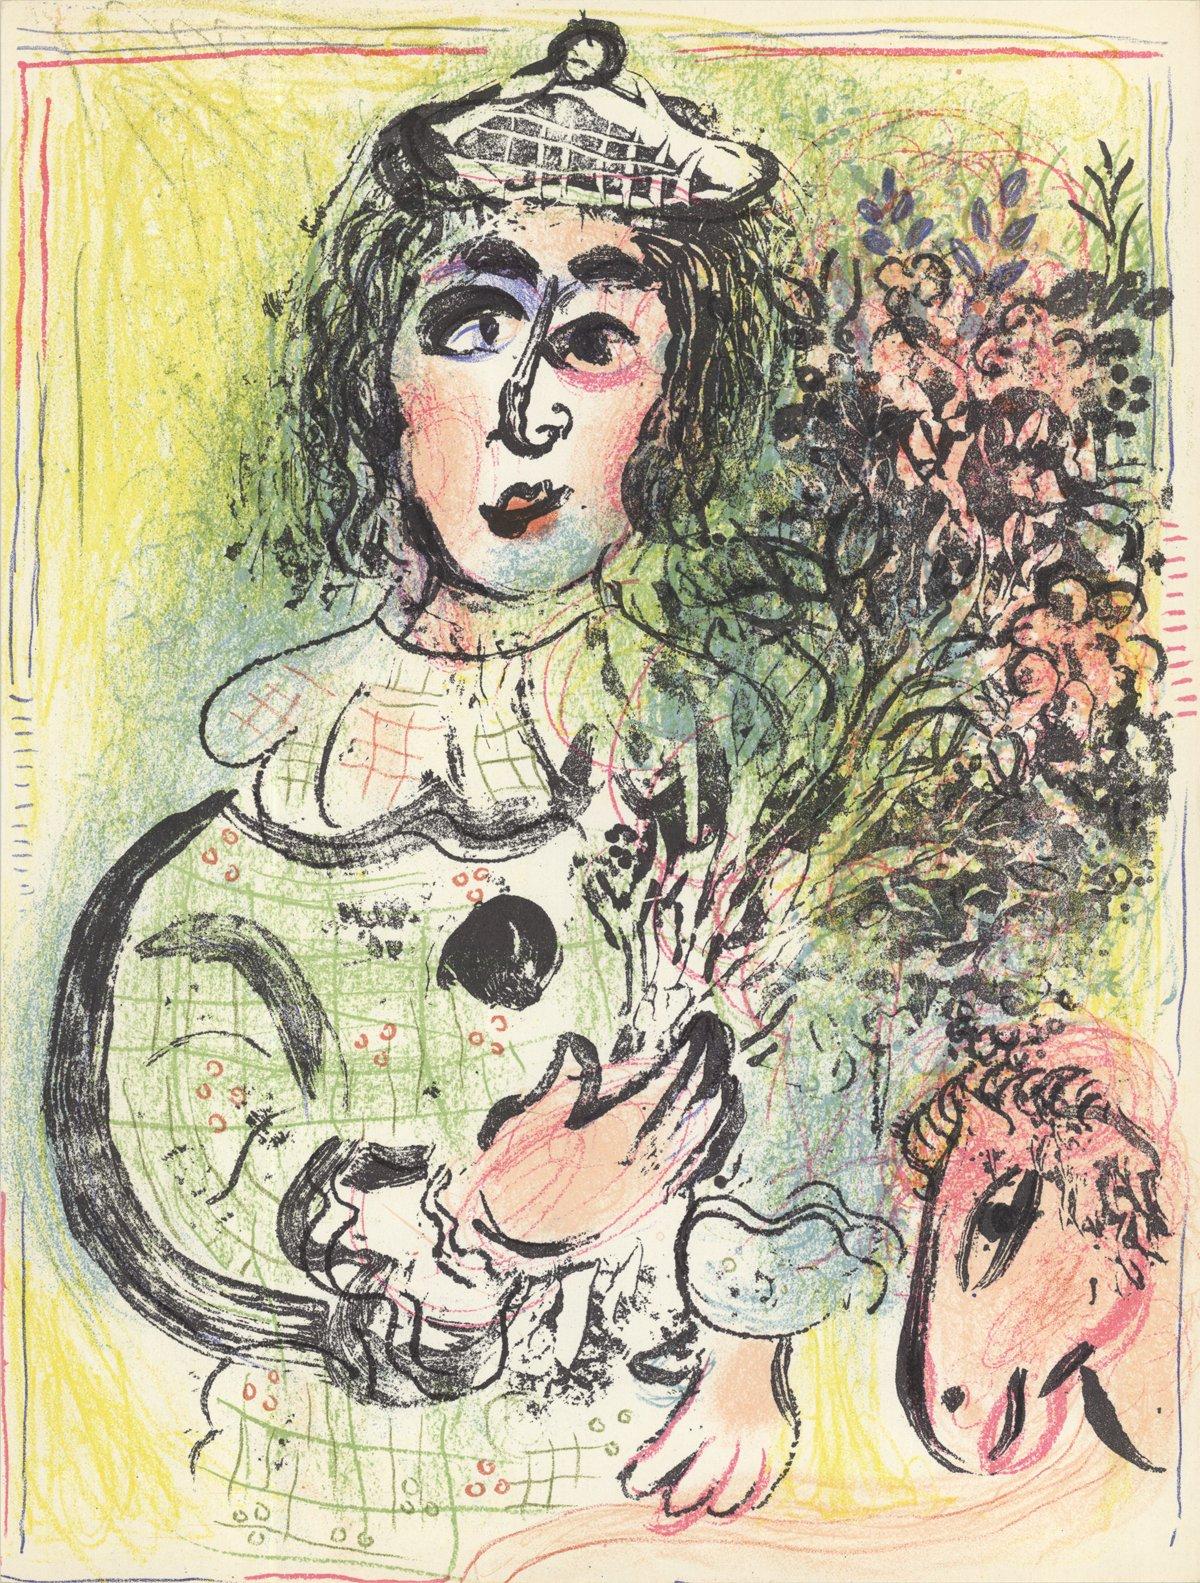 Paper Size: 12.5 x 9.5 inches ( 31.75 x 24.13 cm )
 Image Size: 12.5 x 9.5 inches ( 31.75 x 24.13 cm )
 Framed: No
 Condition: A: Mint
 
 Additional Details: First edition lithograph from Chagall's Lithographs Volume II.
 
 Shipping and Handling: We